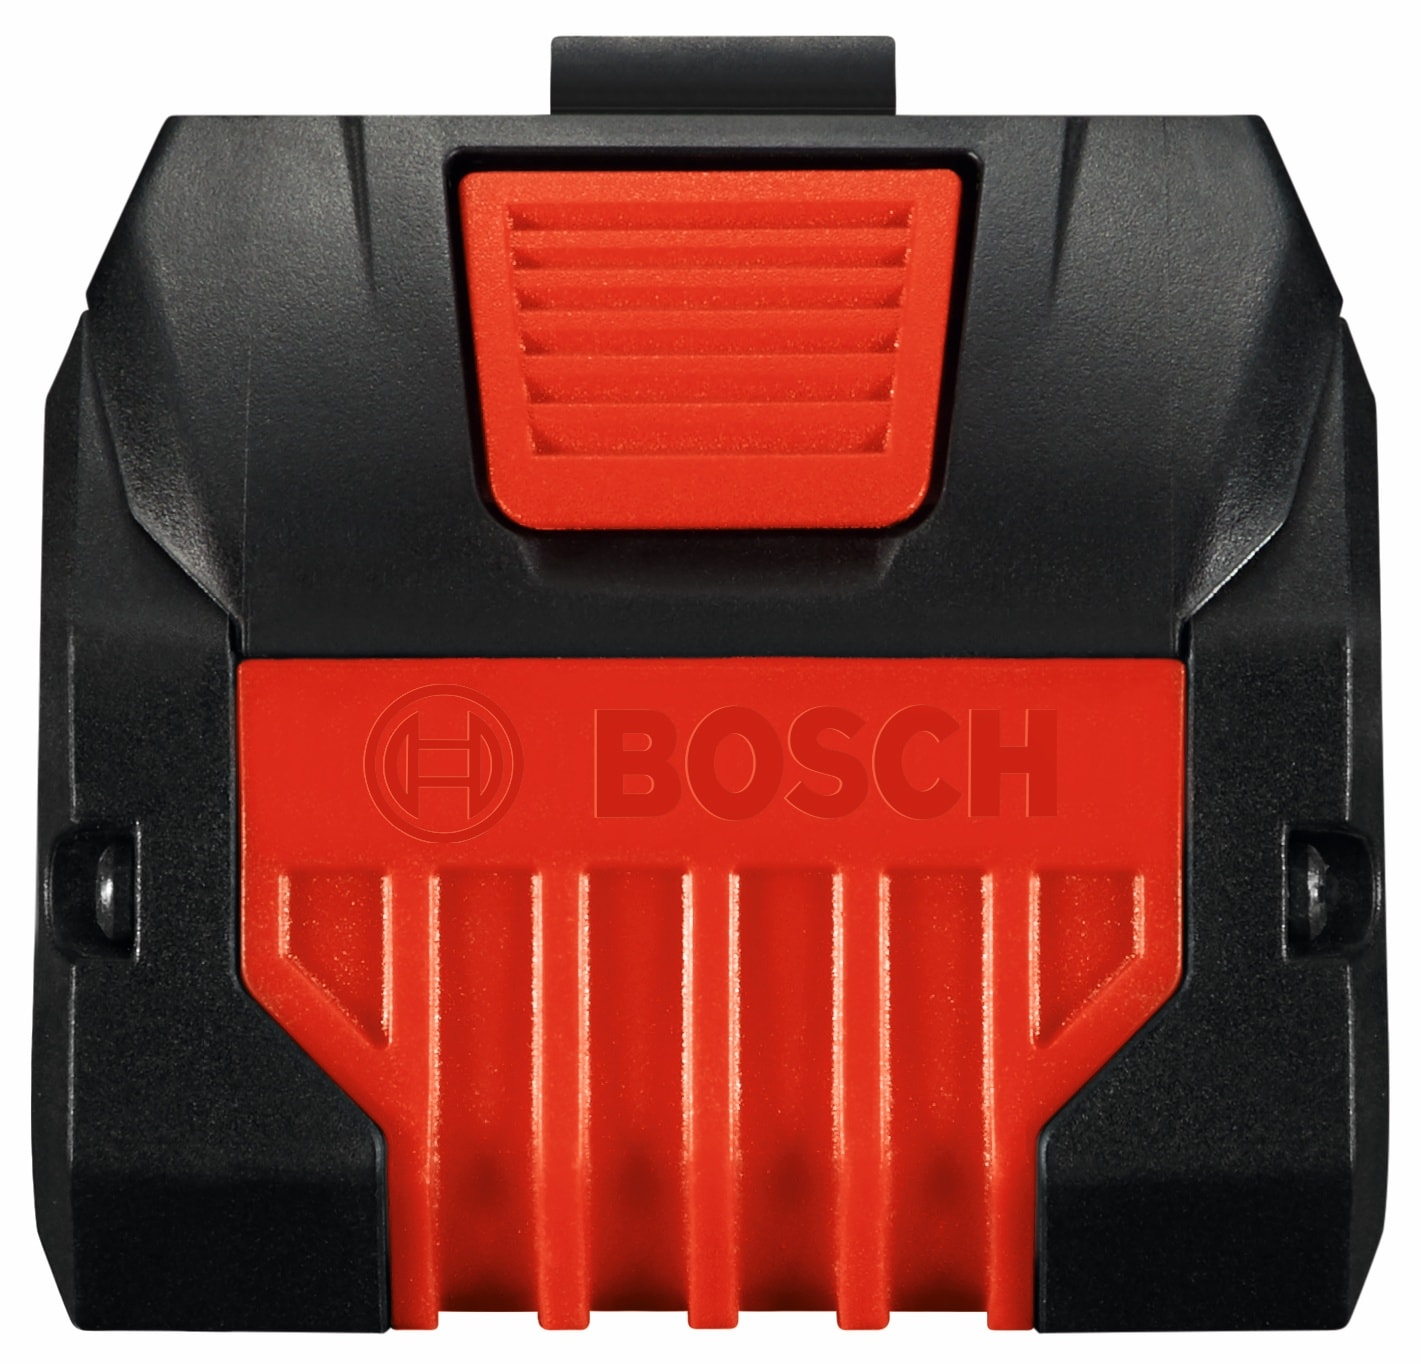 & department Battery PROFACTOR the in Lithium-ion 2-Pack 8 Batteries Bosch Amp-Hour; Power at 8 18-V Chargers Amp-Hour Tool